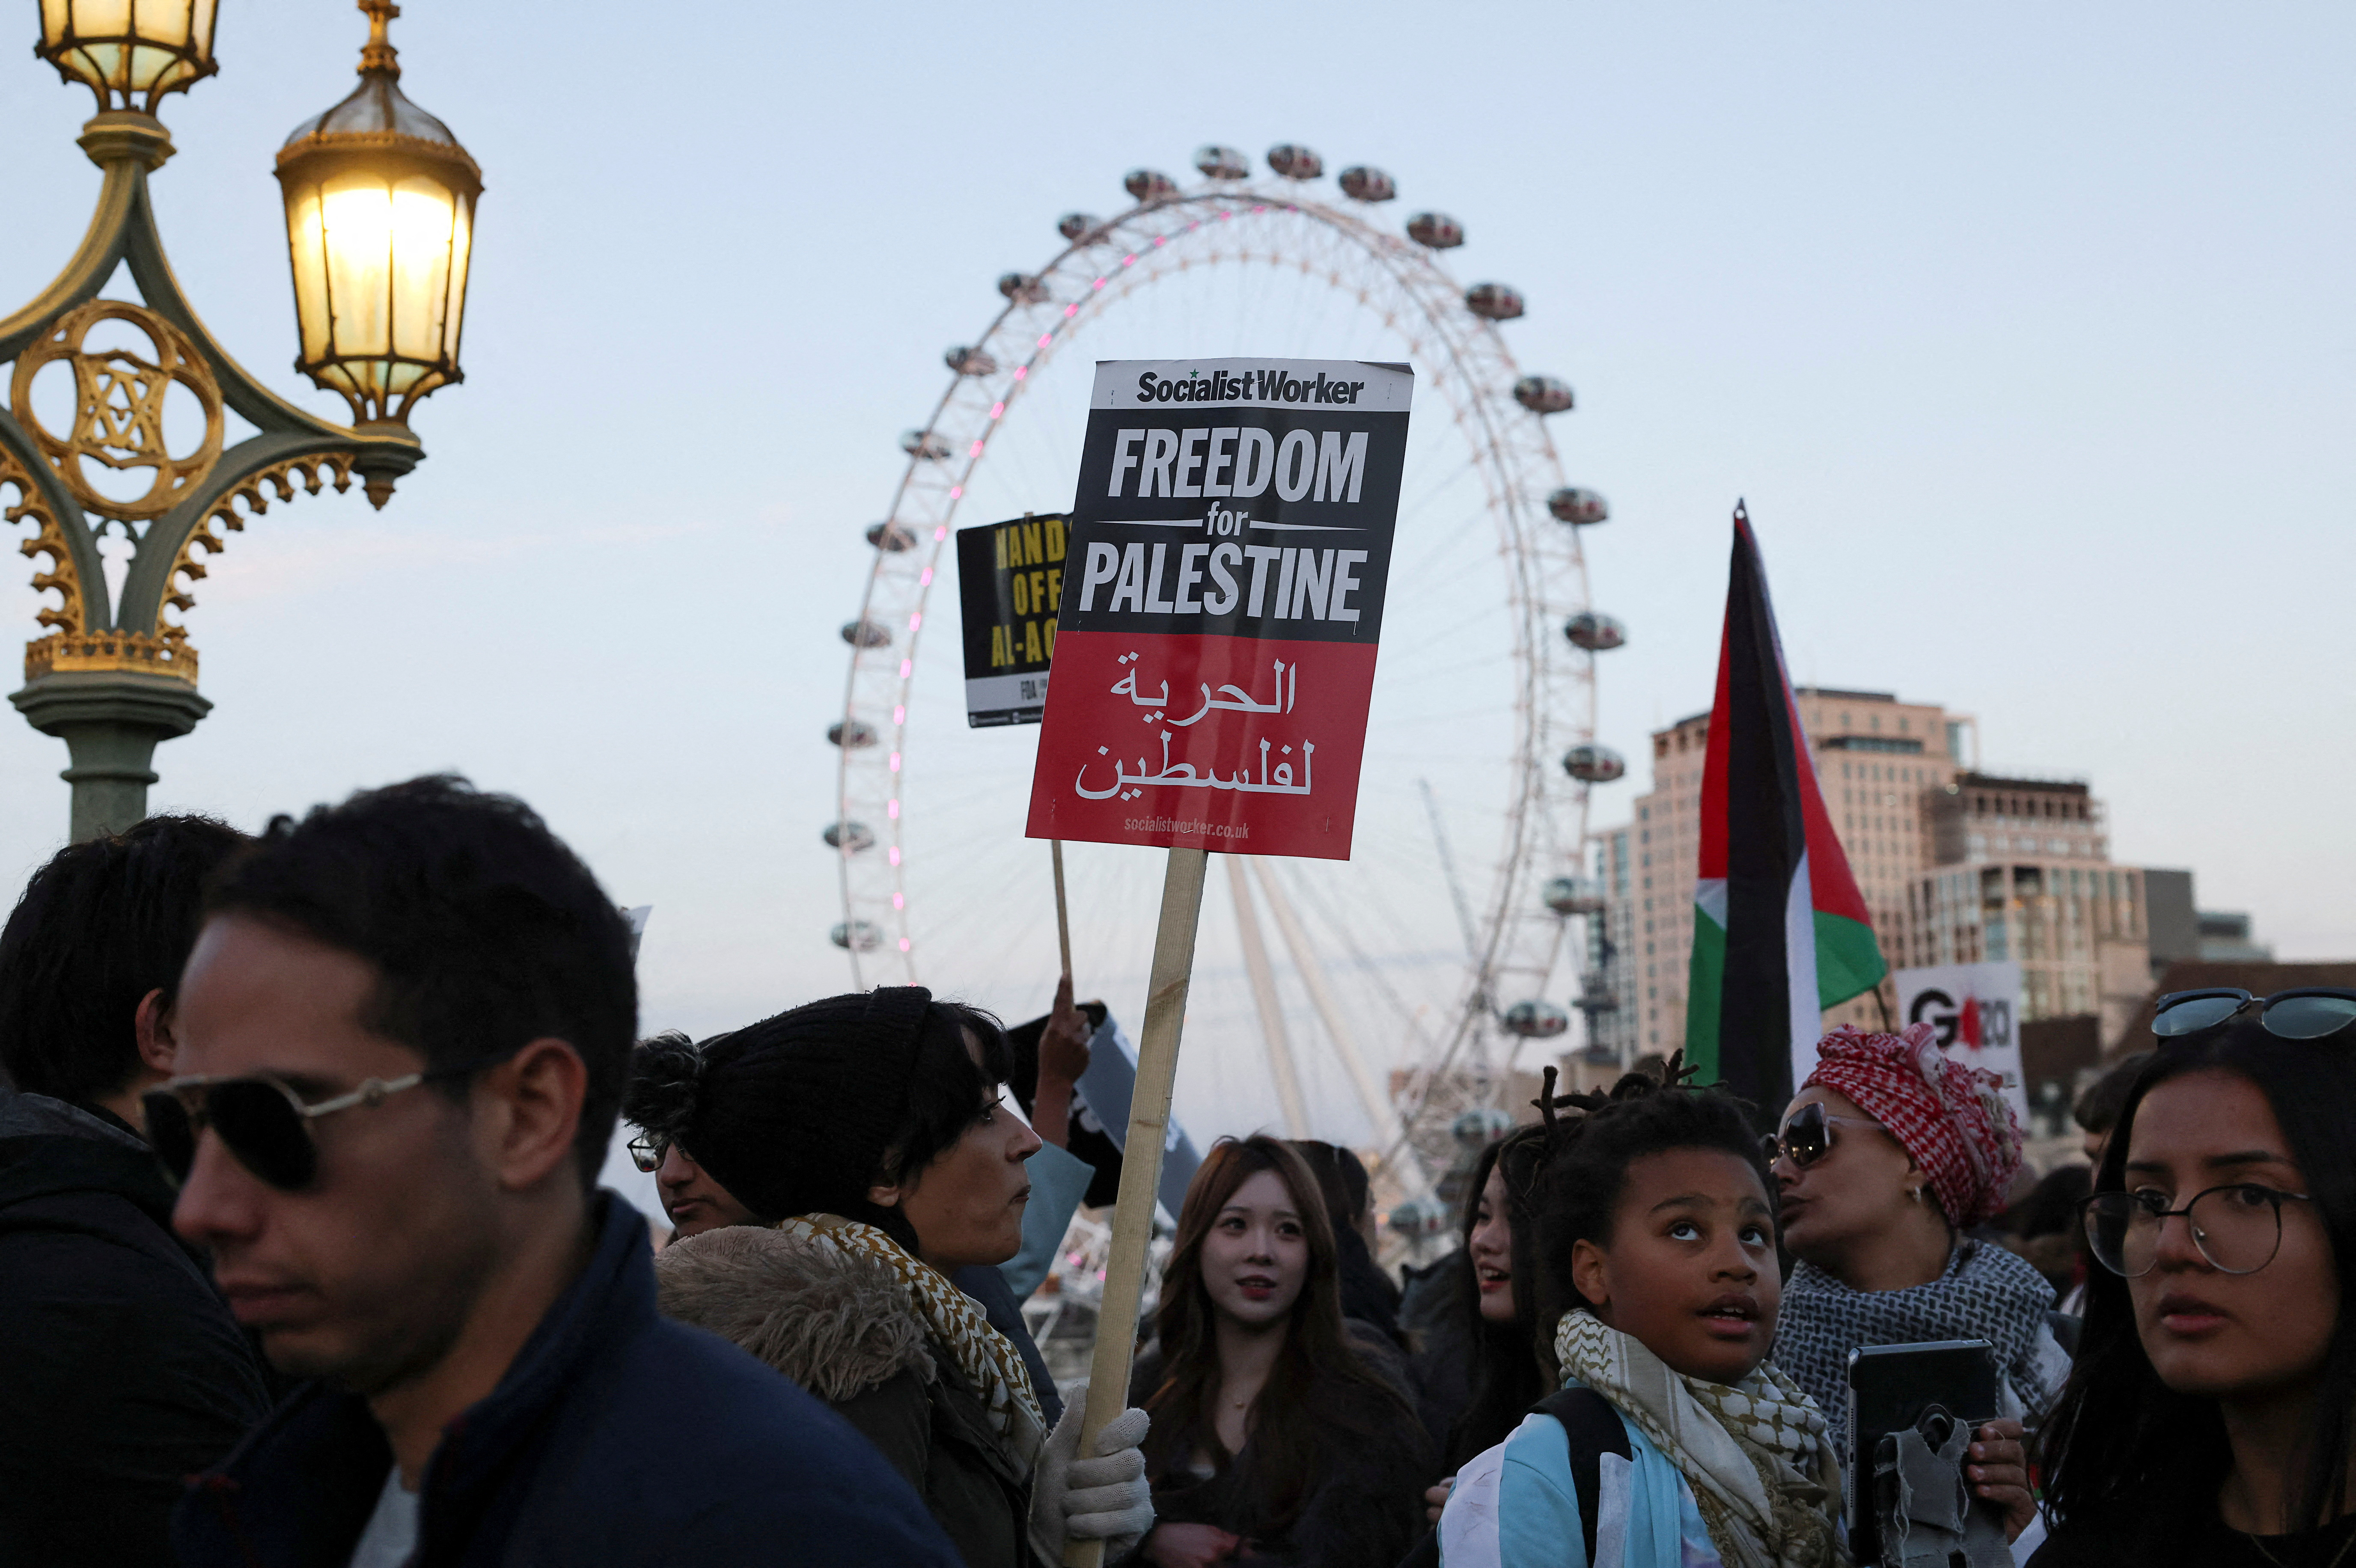 Protest in solidarity with Palestinians in Gaza, in London